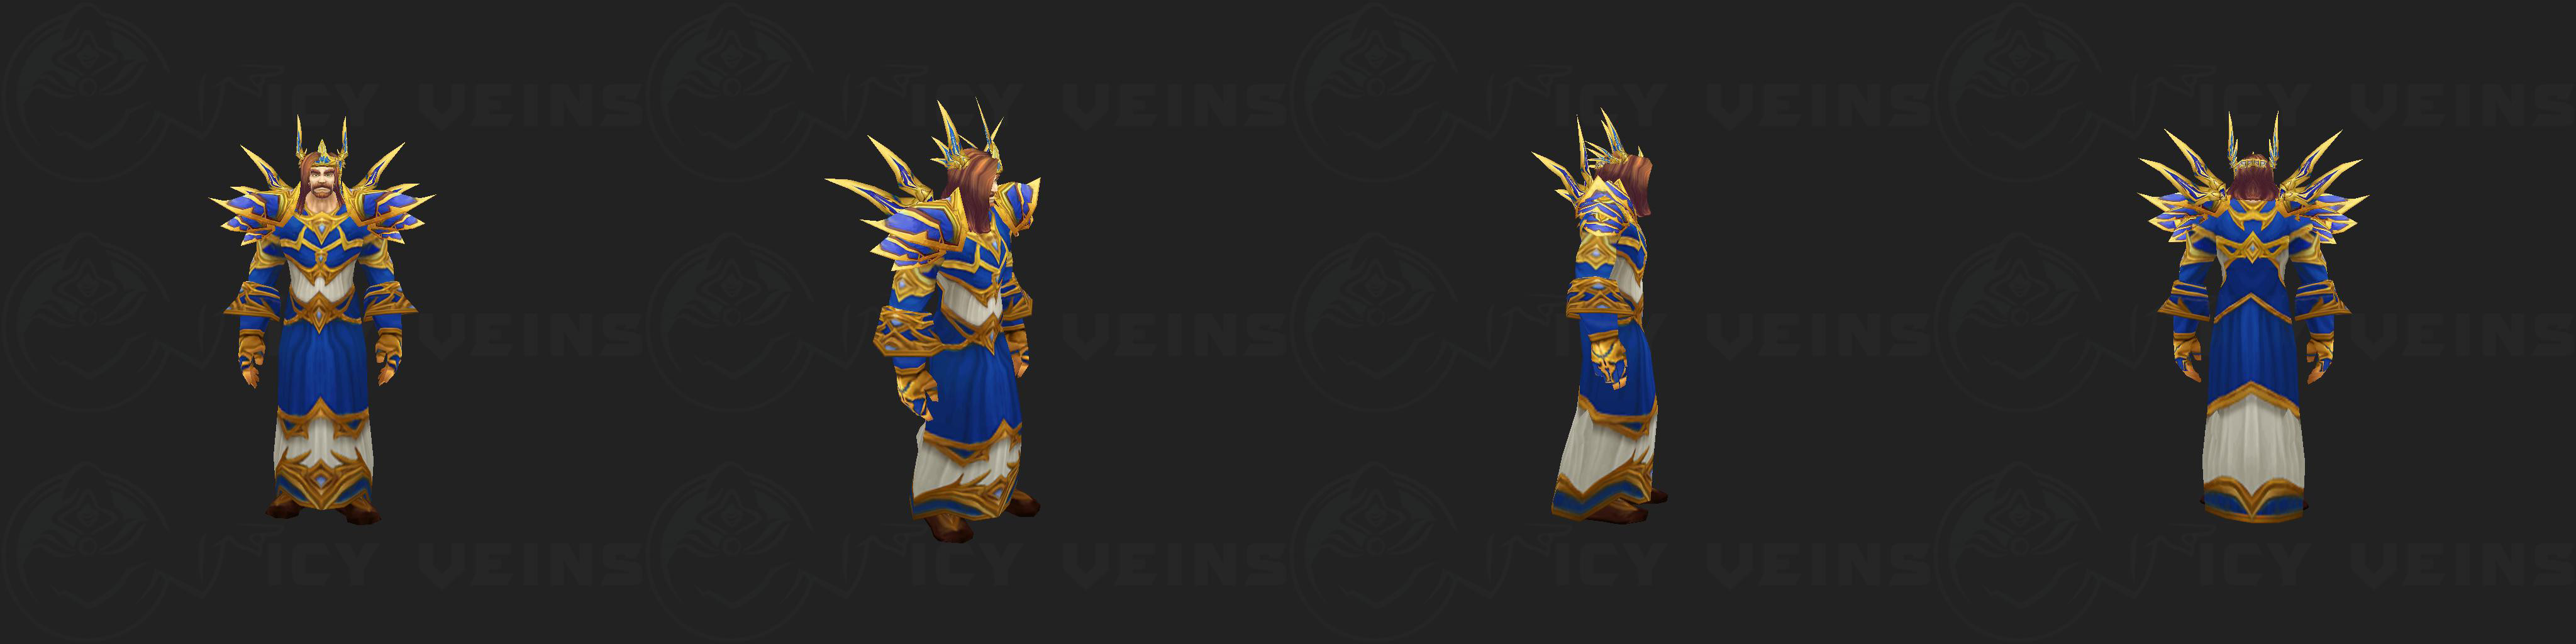  Ideal Death Protection sets for PVP (mages): Set